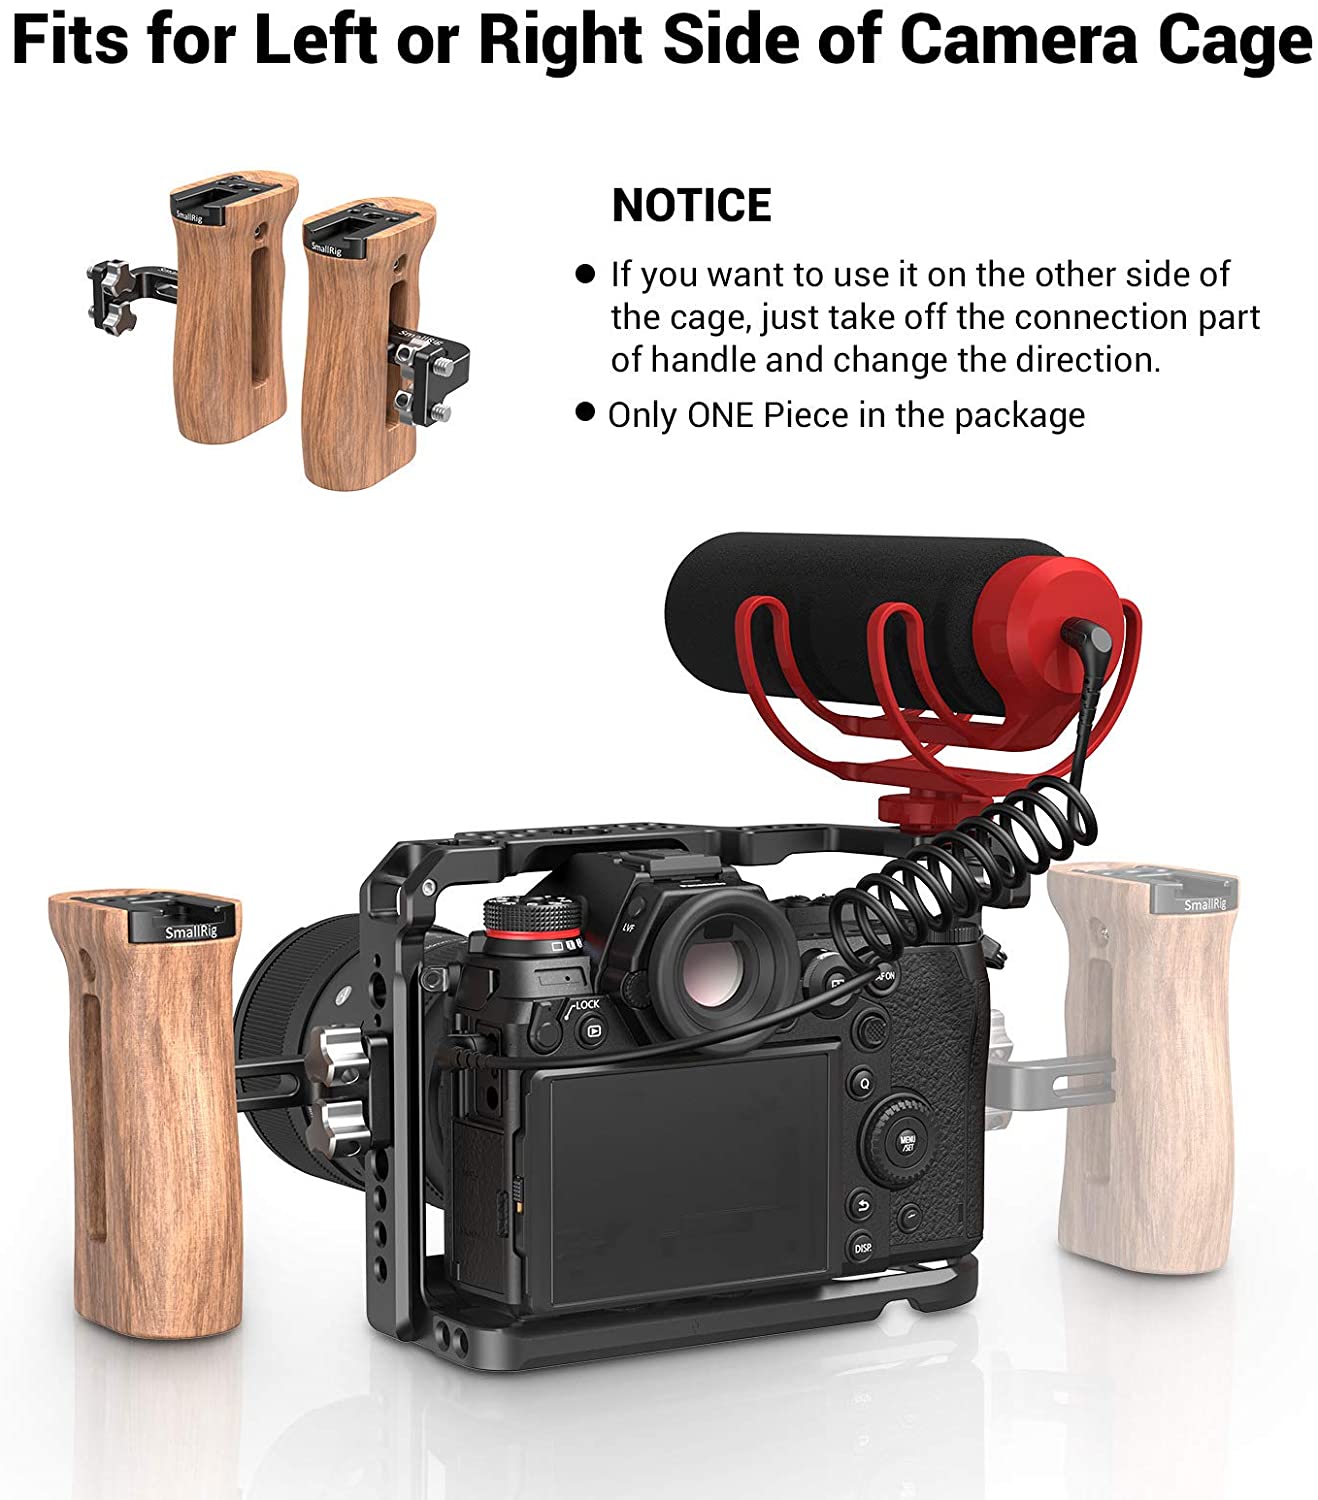 SMALLRIG Universal Side Wooden Handle Grip for DSLR Camera Cage w/Cold Shoe Mount, Threaded Holes - 2093B